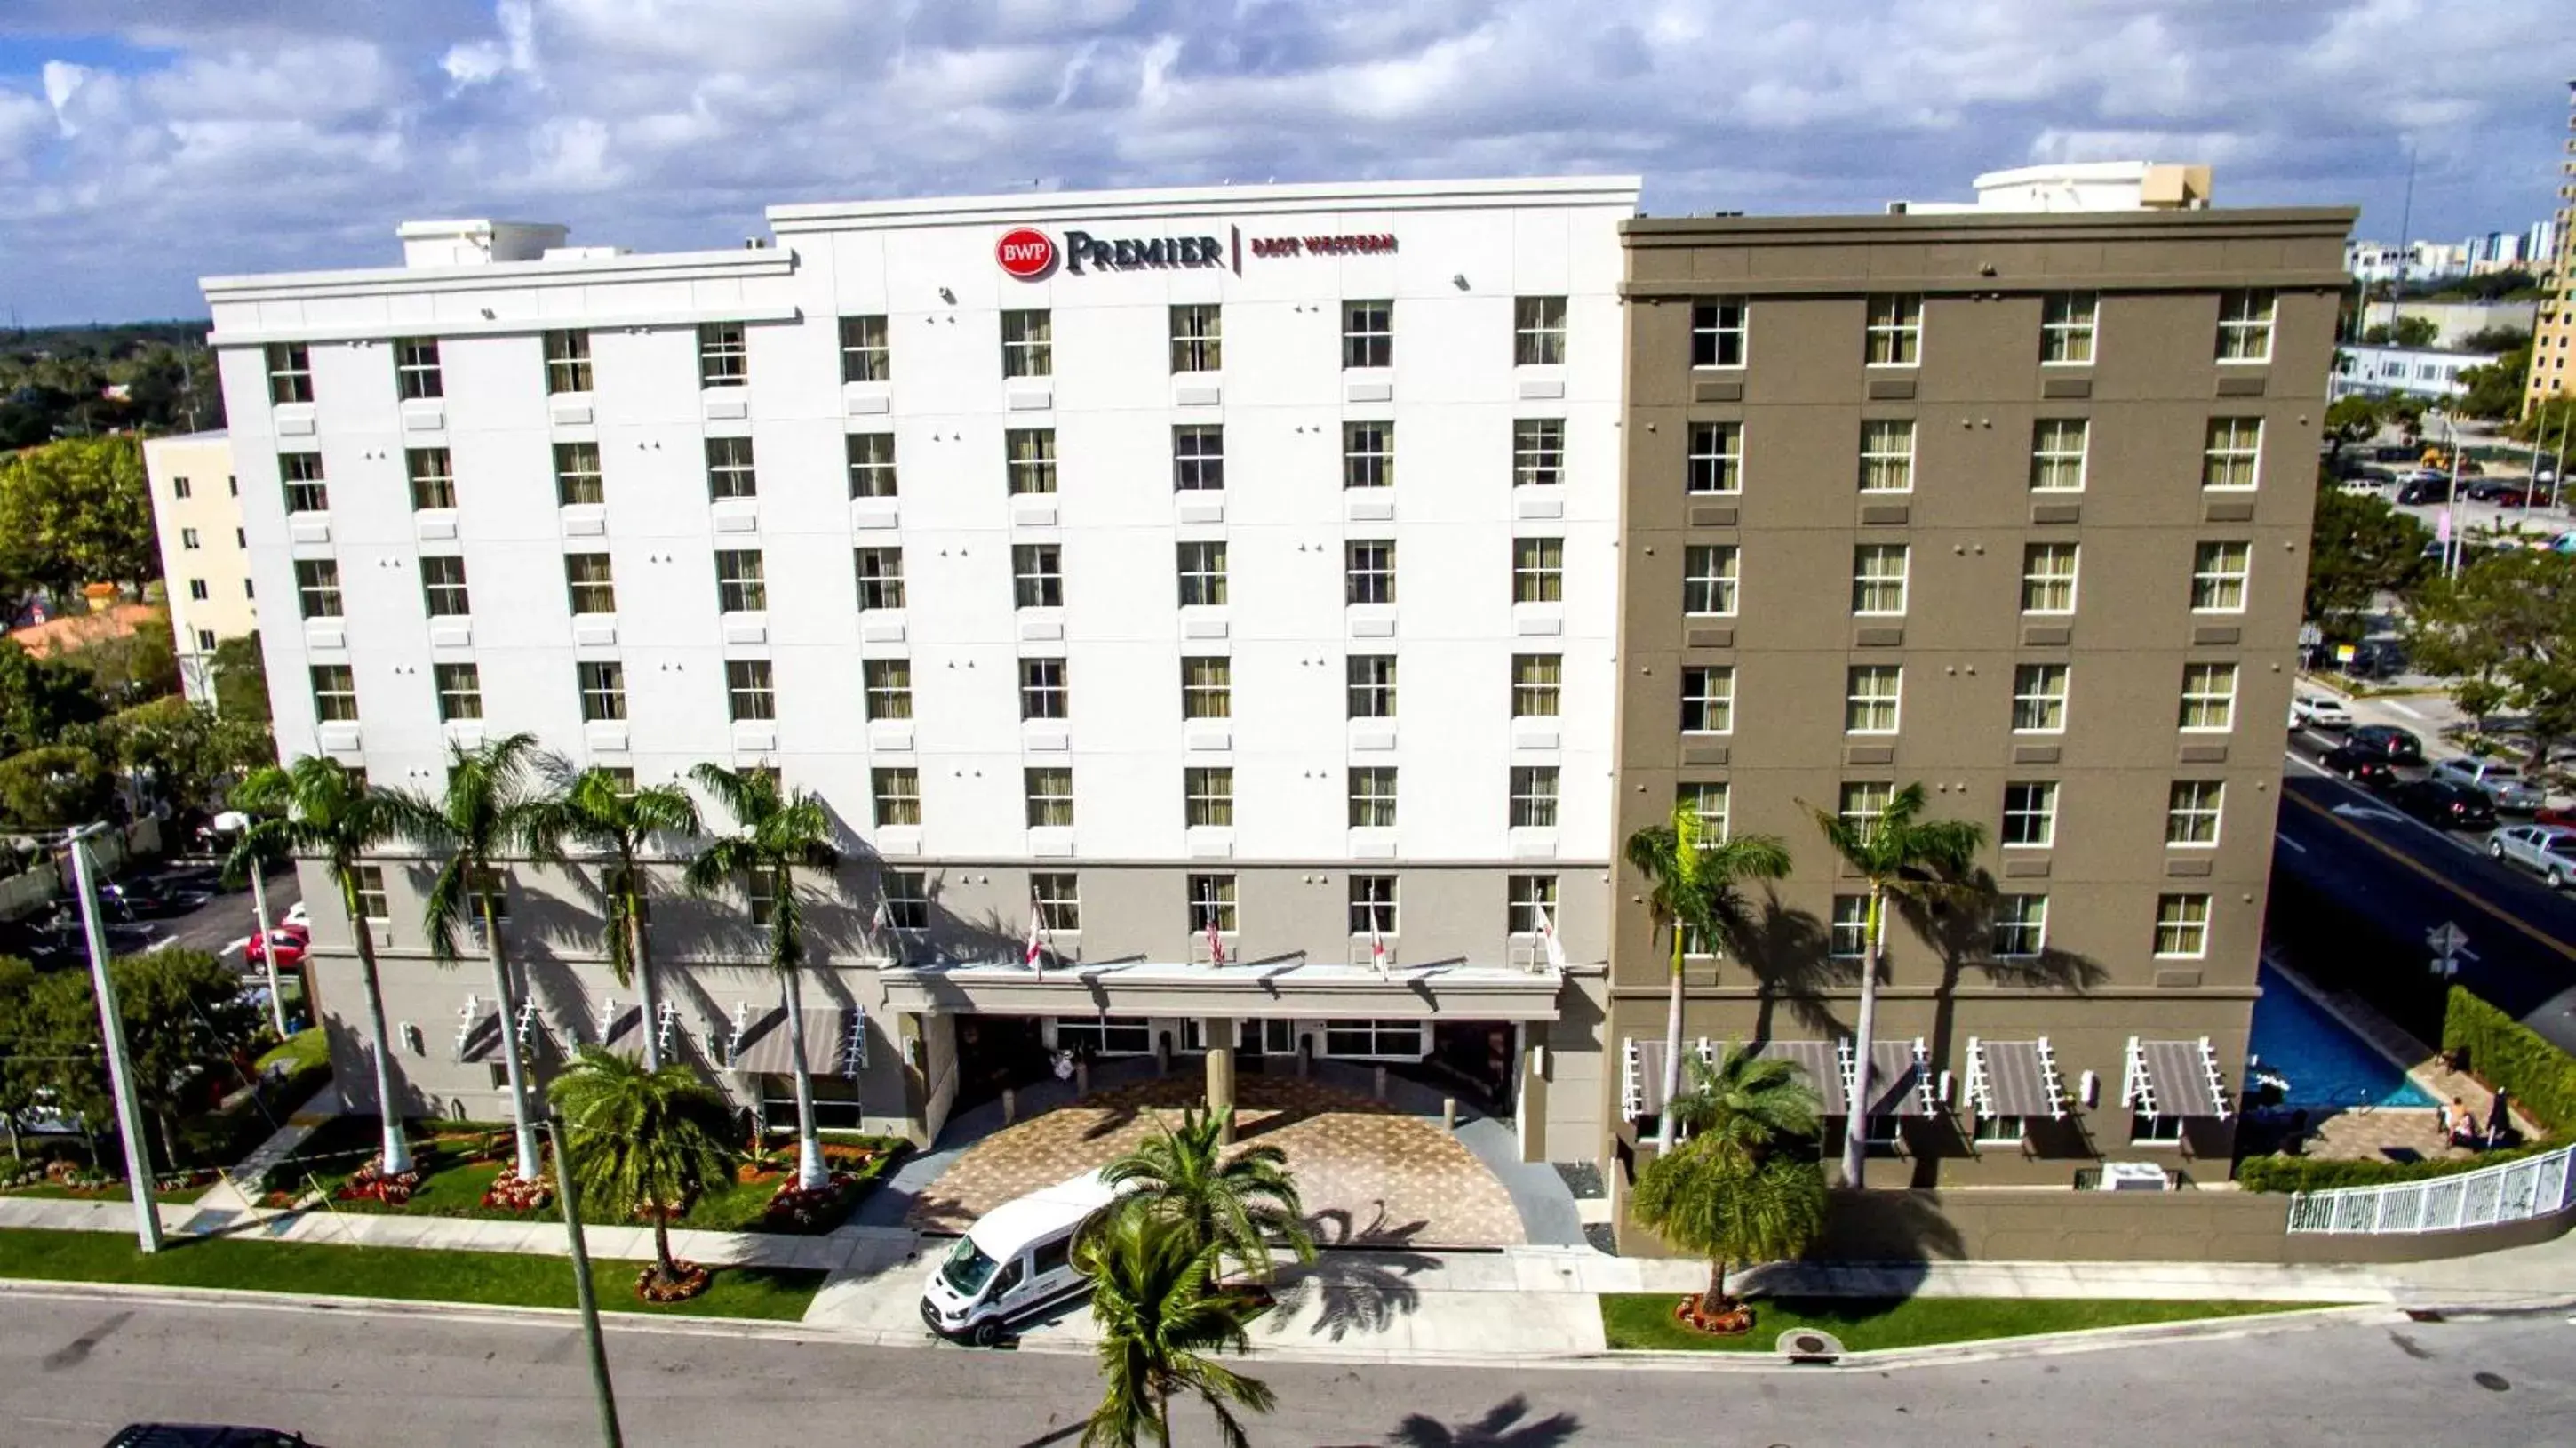 Nearby landmark, Property Building in Best Western Premier Miami International Airport Hotel & Suites Coral Gables